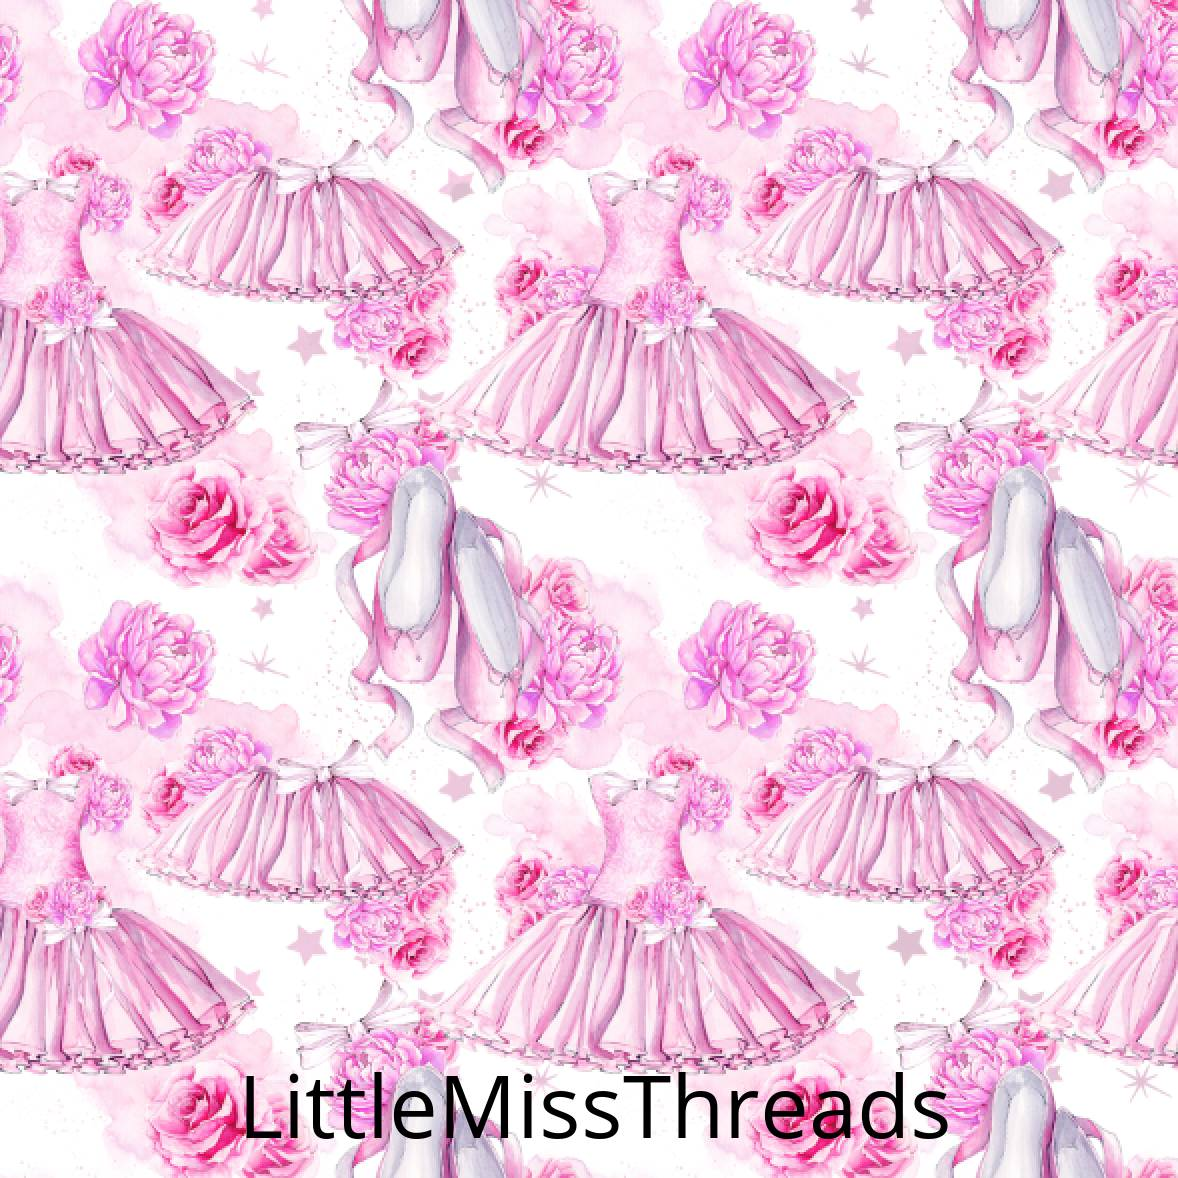 PRE ORDER Tiny Dancer - MM Fabric Print - Fabric from [store] by Mini Mooches - 